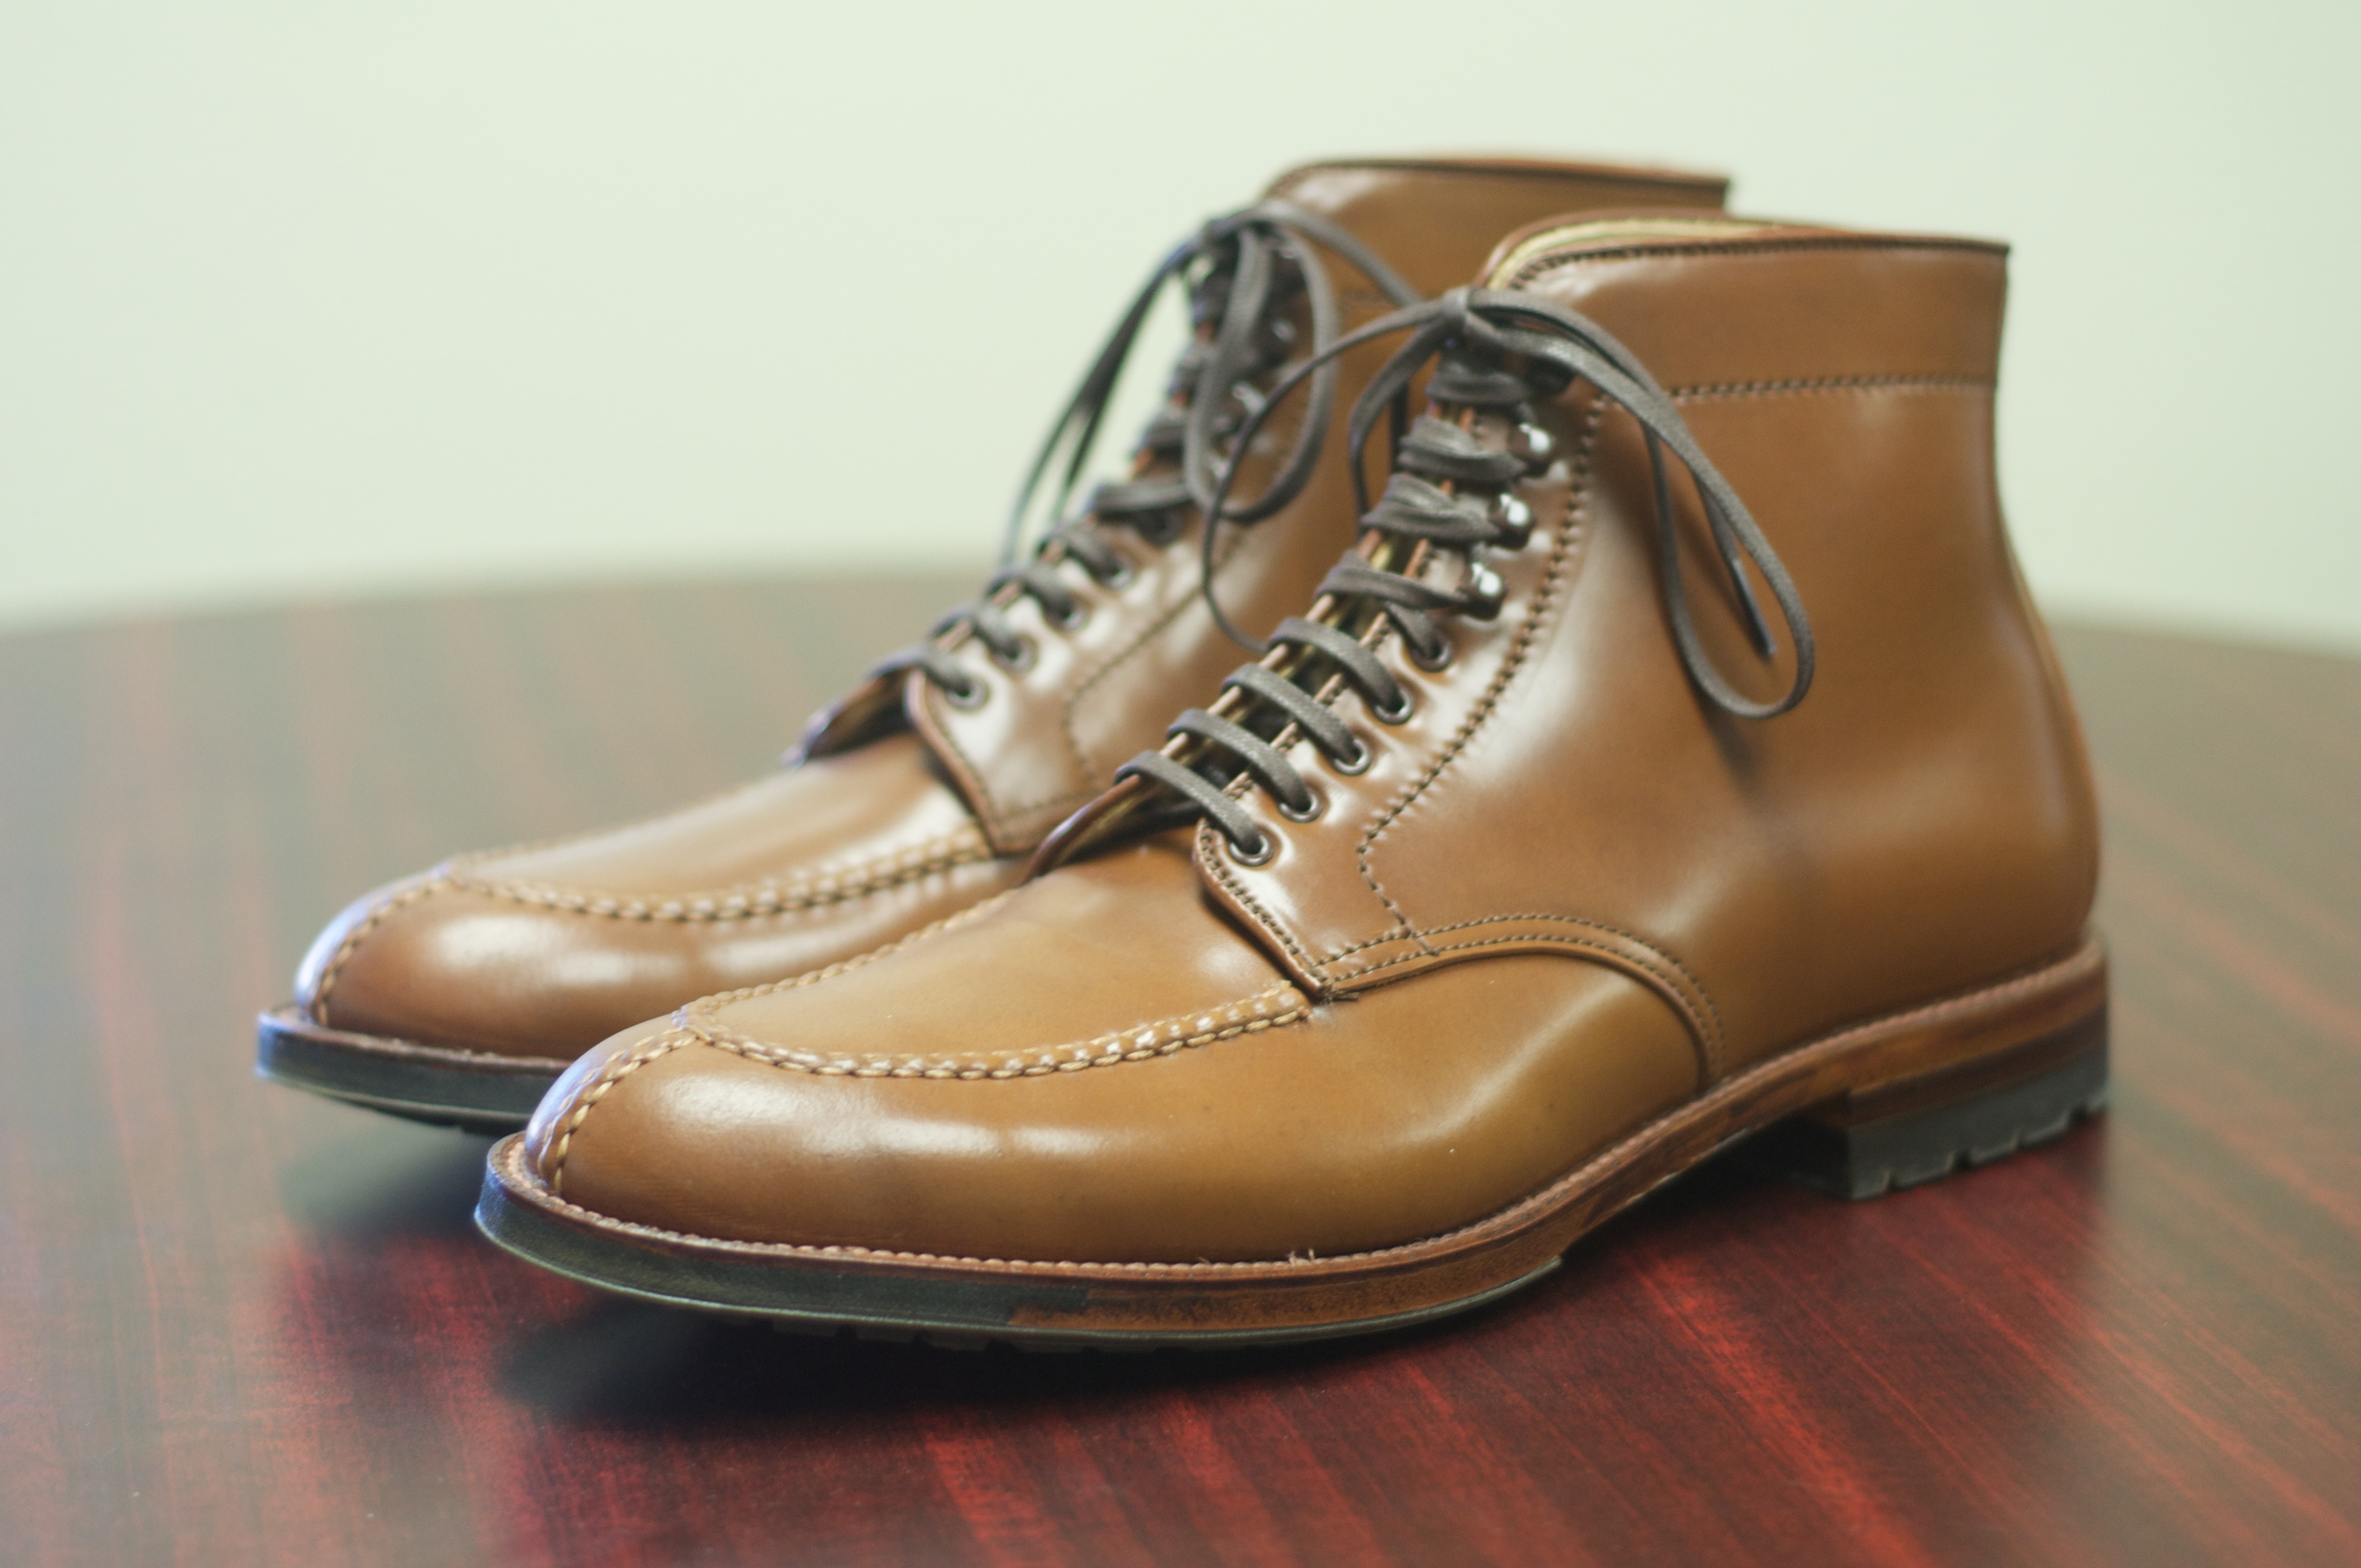 shell cordovan boots sale